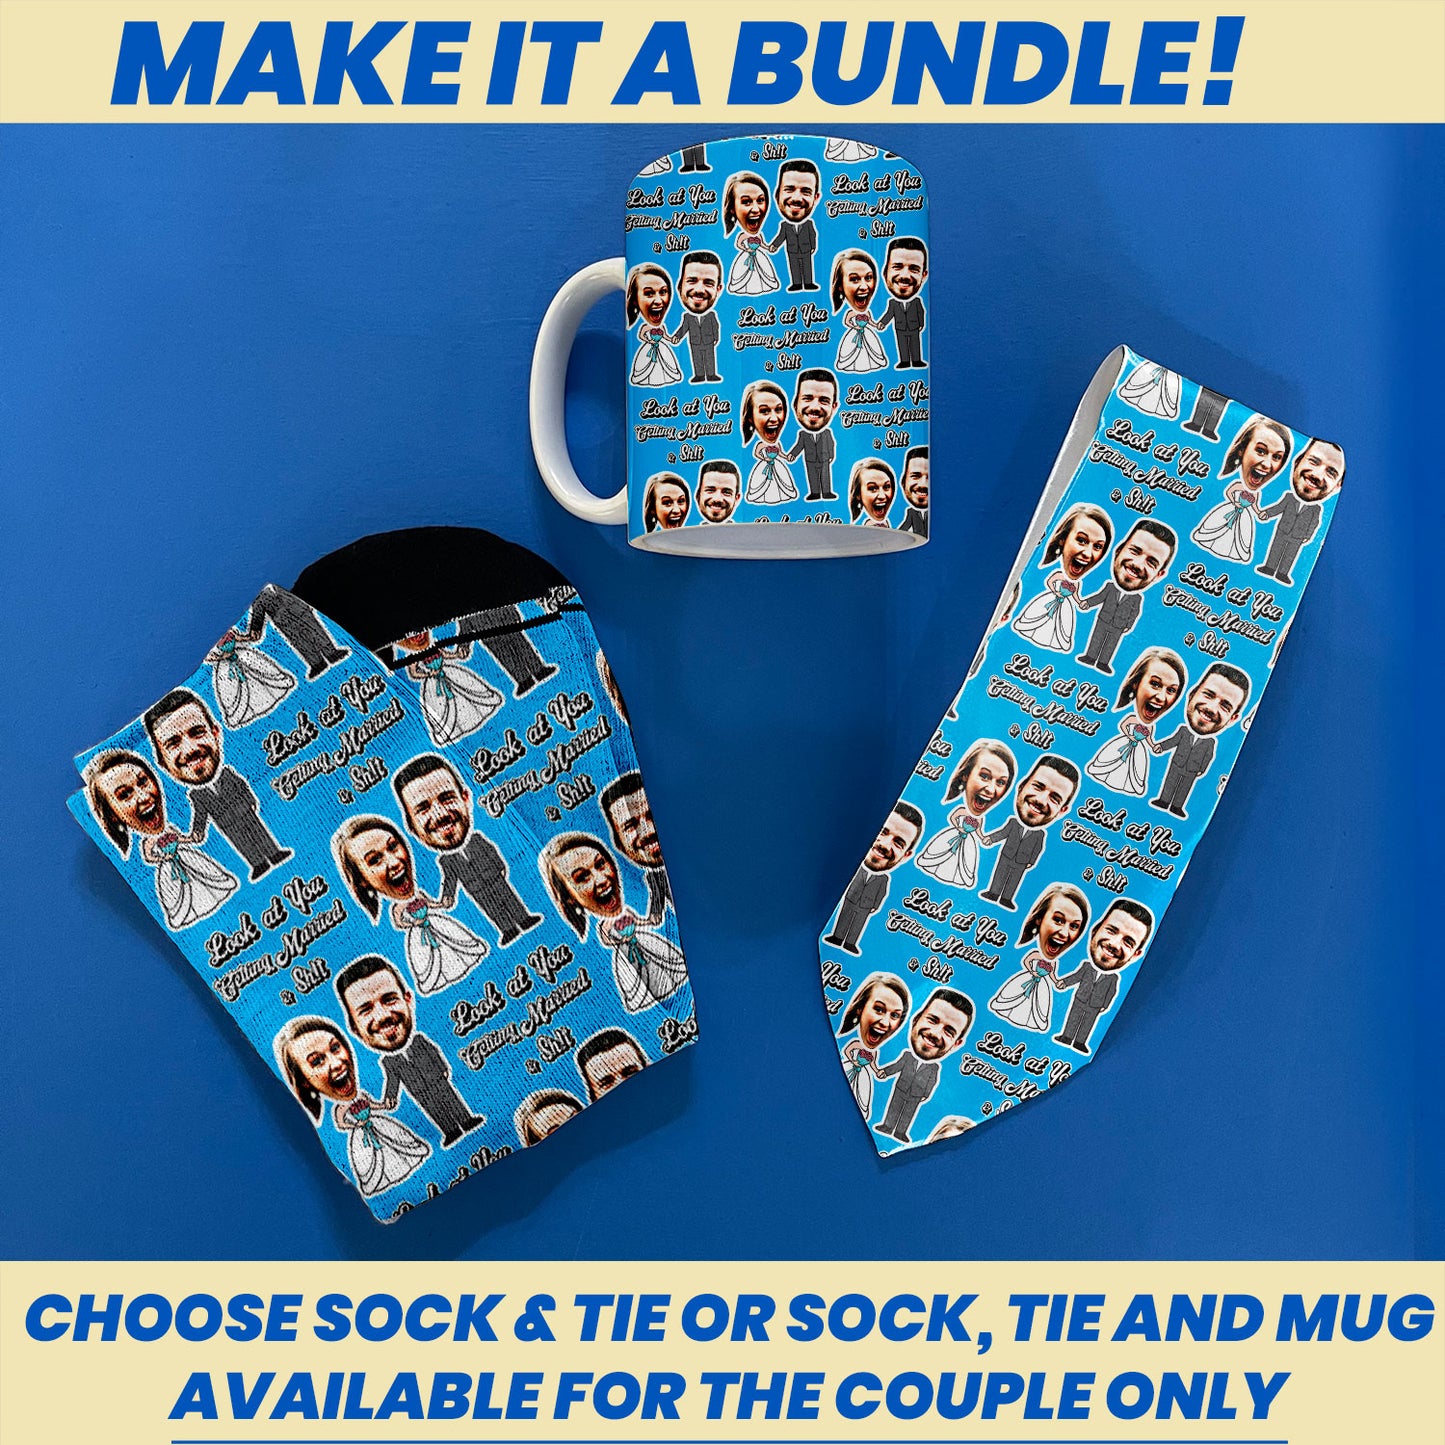 unique wedding gift for couples personalized socks with faces bundle of necktie, coffee mug and socks